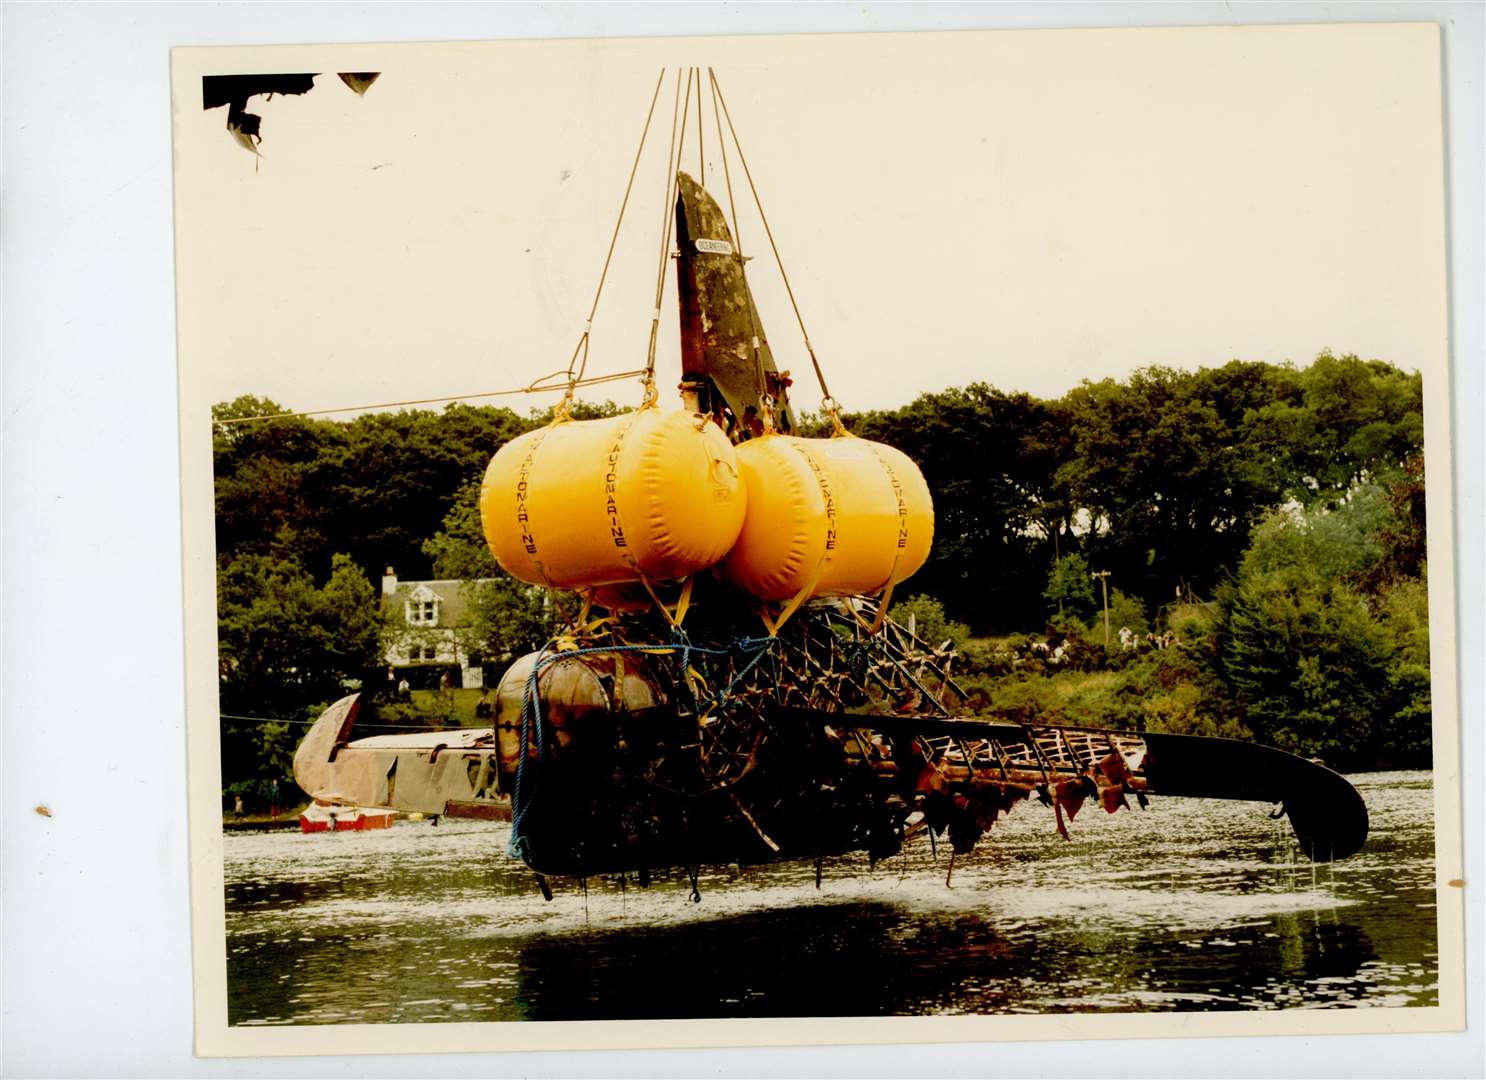 The Wellington Bomber is lifted out of Loch Ness. Picture supplied by Brooklands Museum.